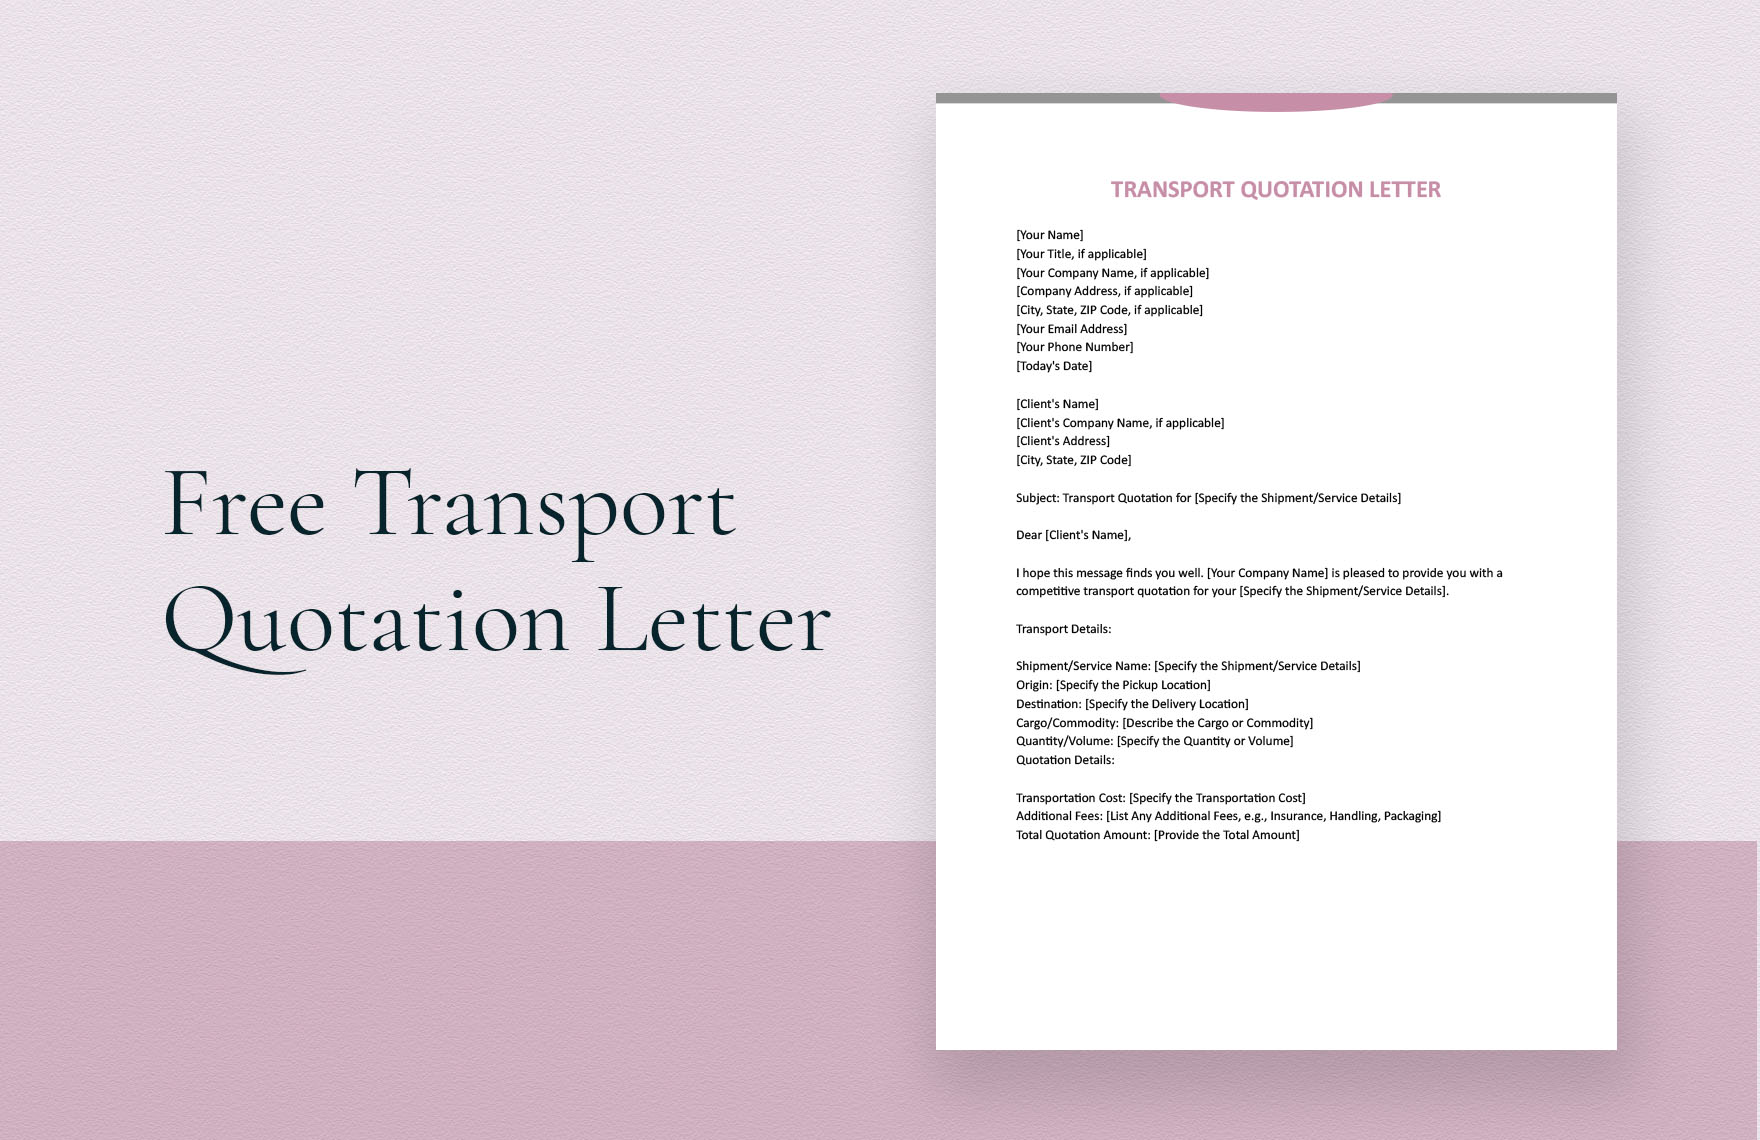 Transport Quotation Letter in Word, Google Docs